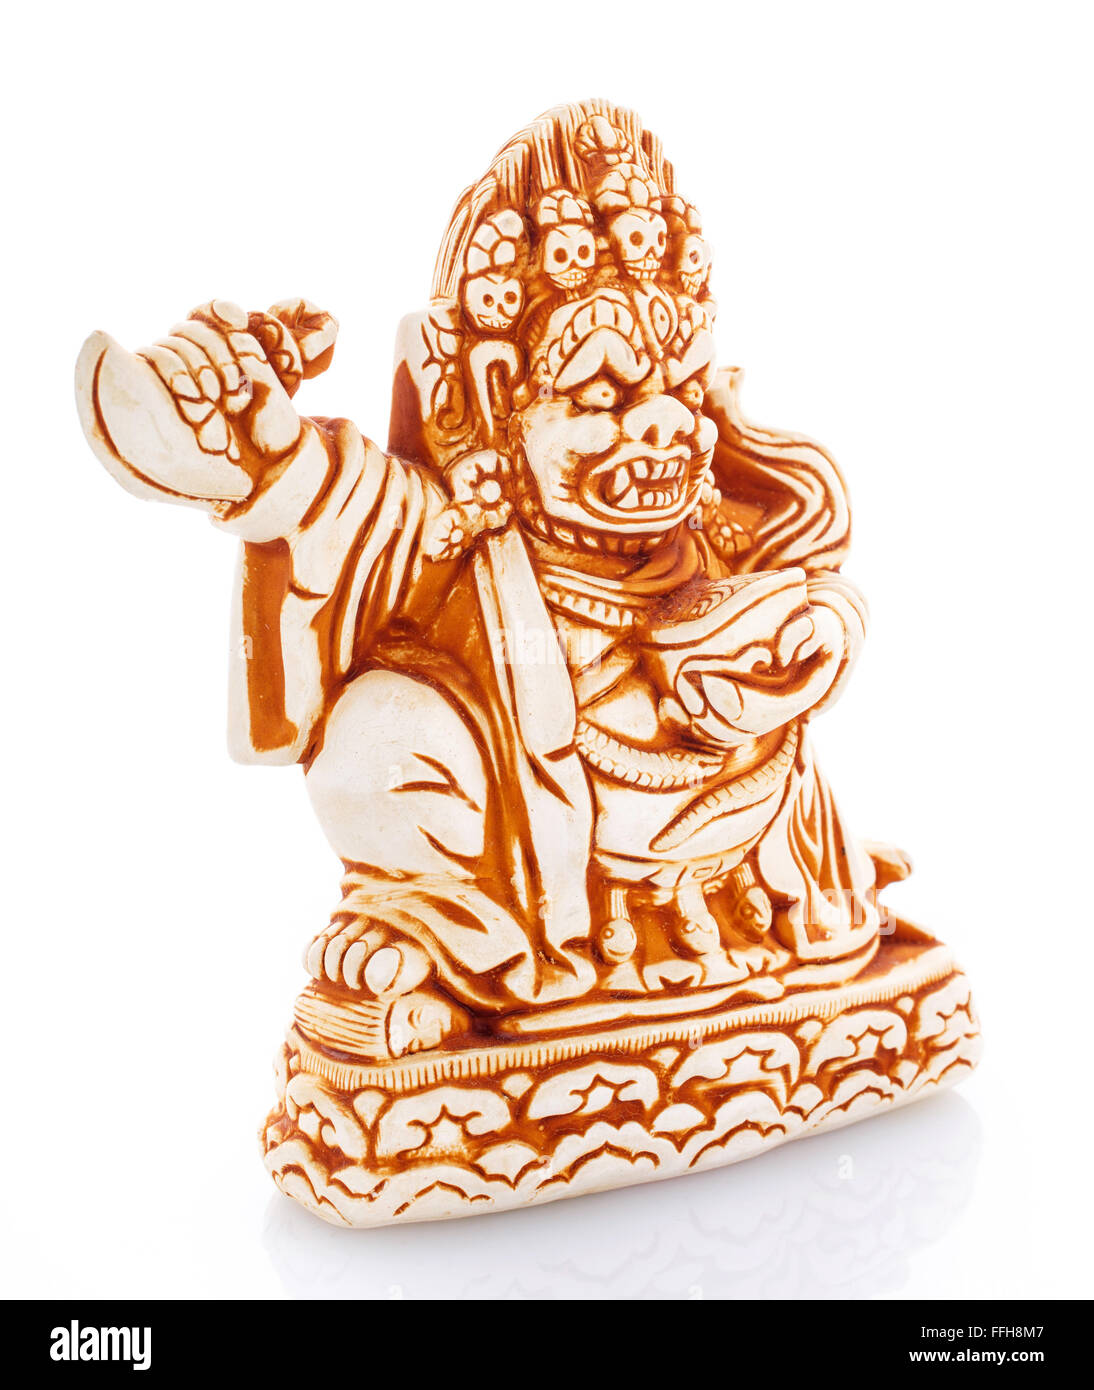 Chinese culture figurine on a white background Stock Photo